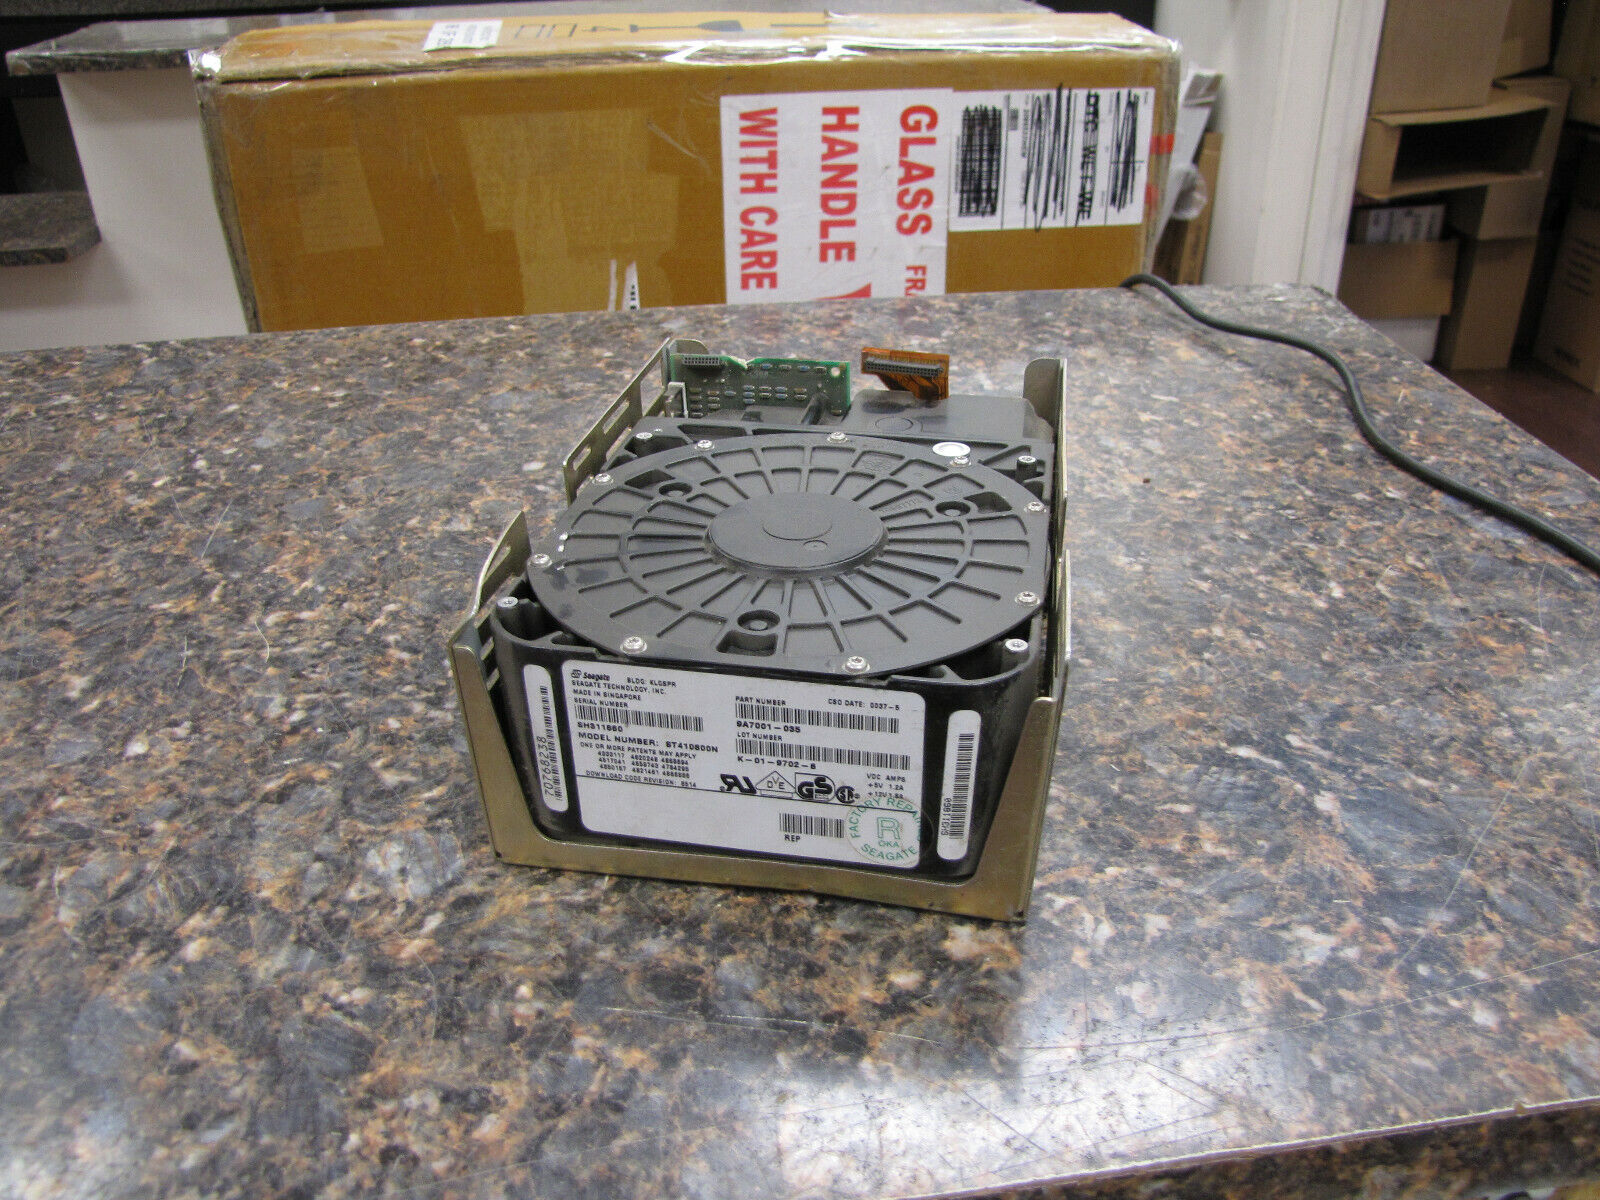 Vintage Seagate Hard Drive Model: ST410800N - as-is untested